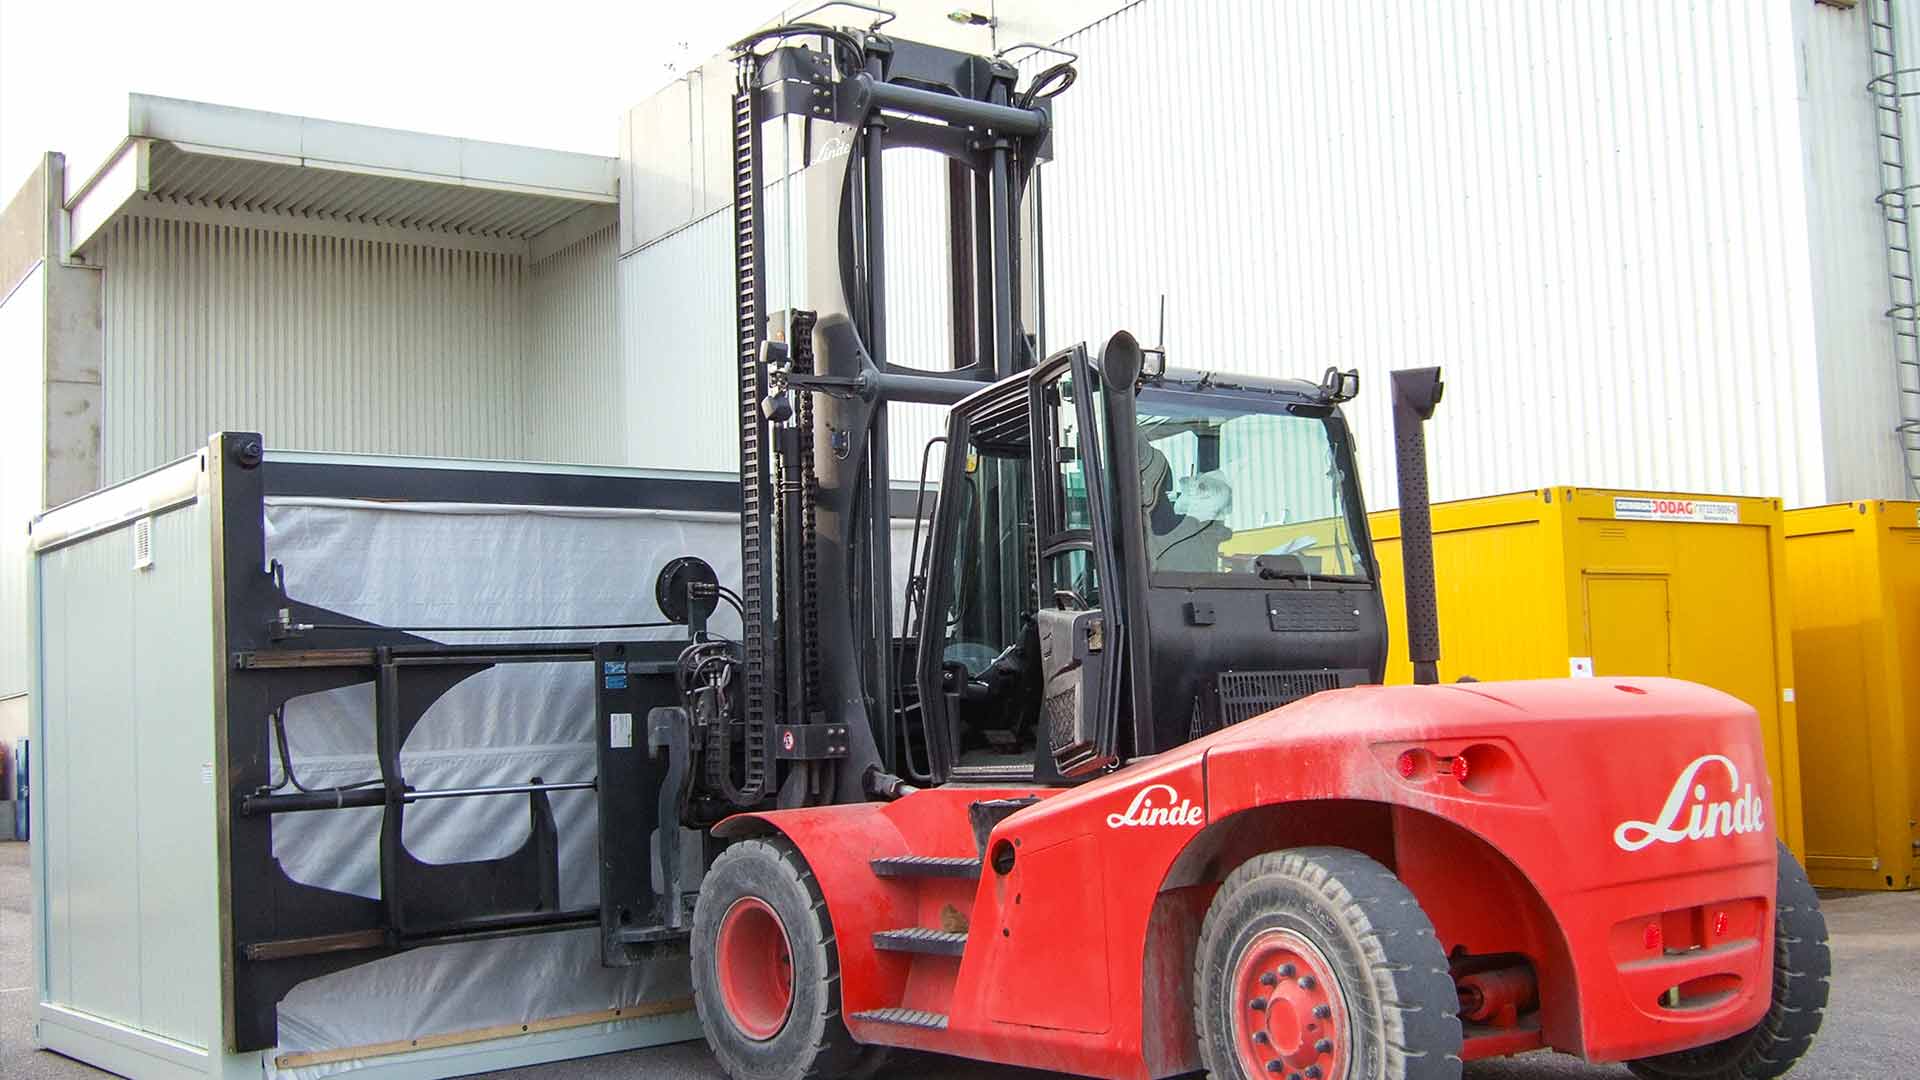 Forklift truck with wide attachment that picks up a container on its long side for transportation